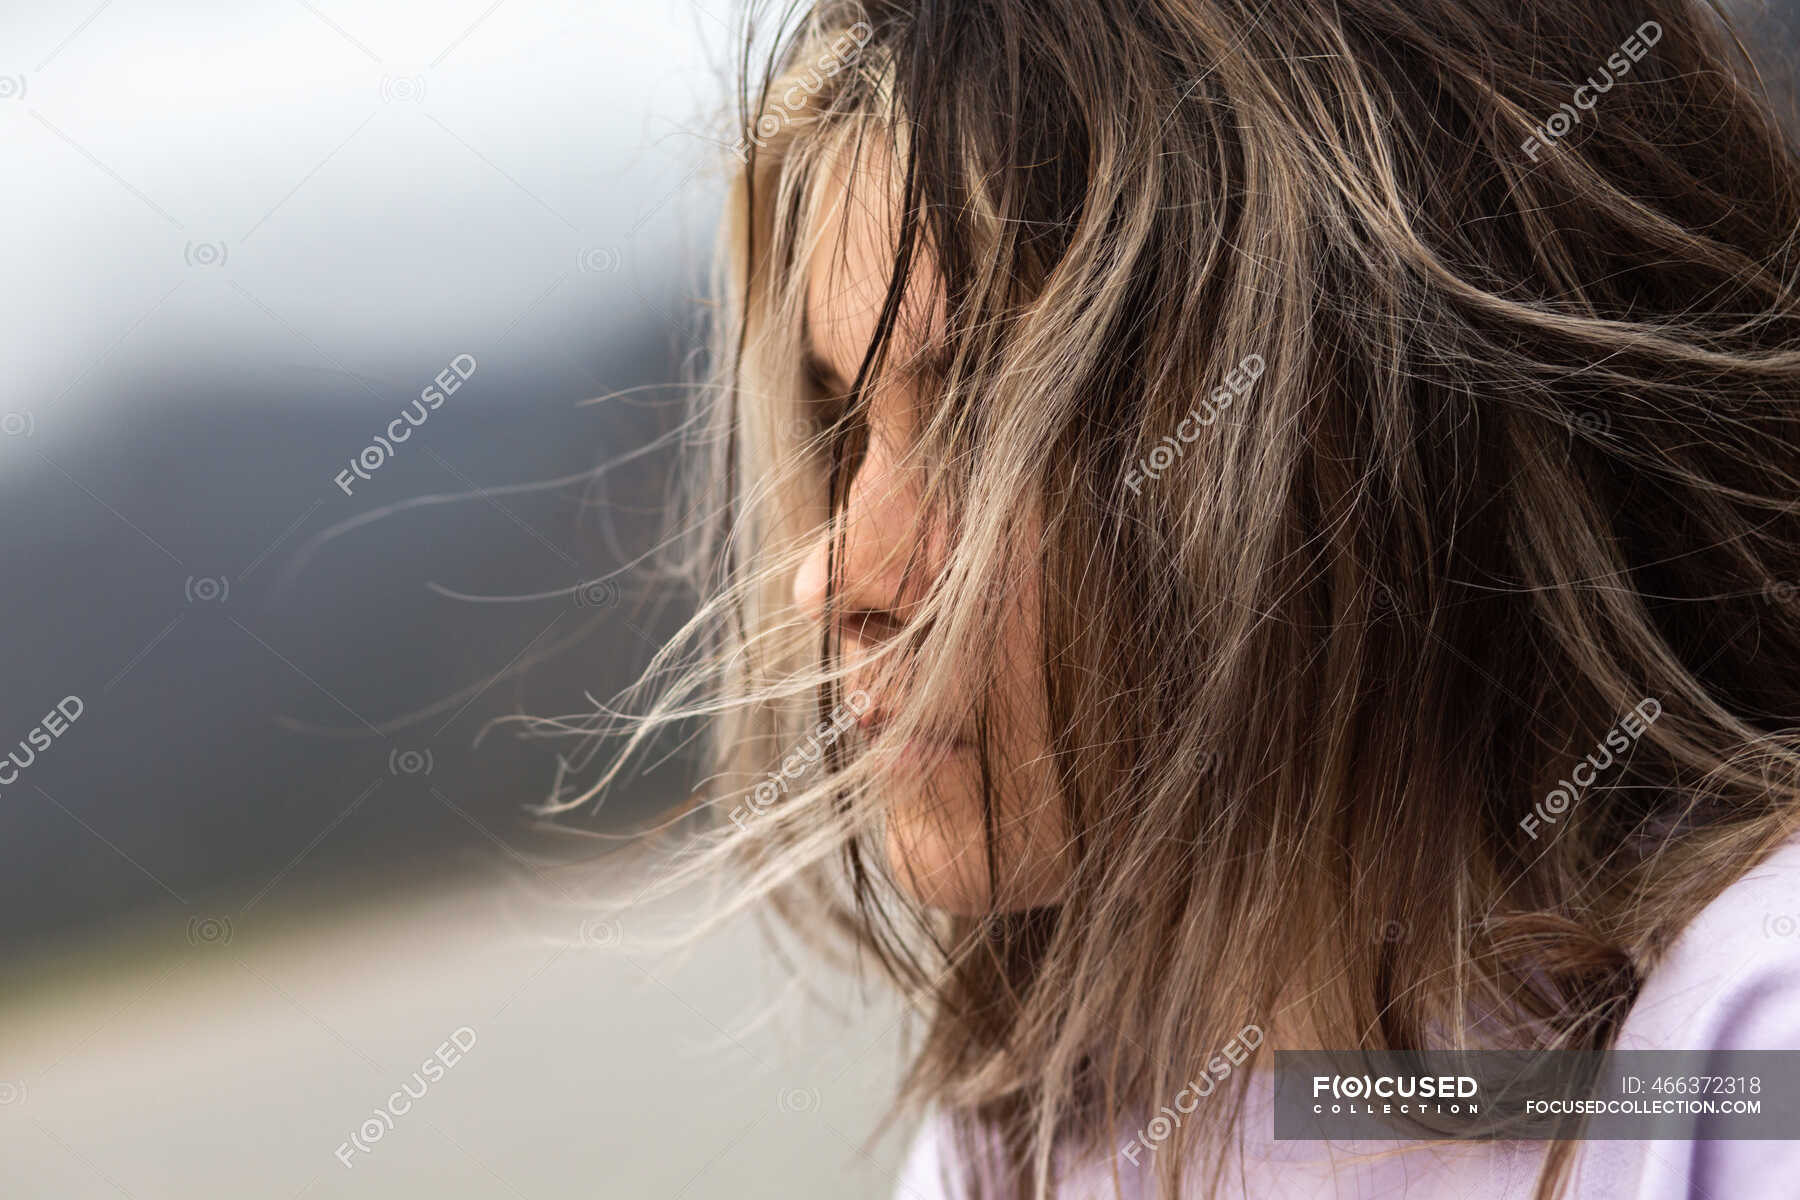 Young girl's hair blowing in the wind — white, nose - Stock Photo |  #466372318